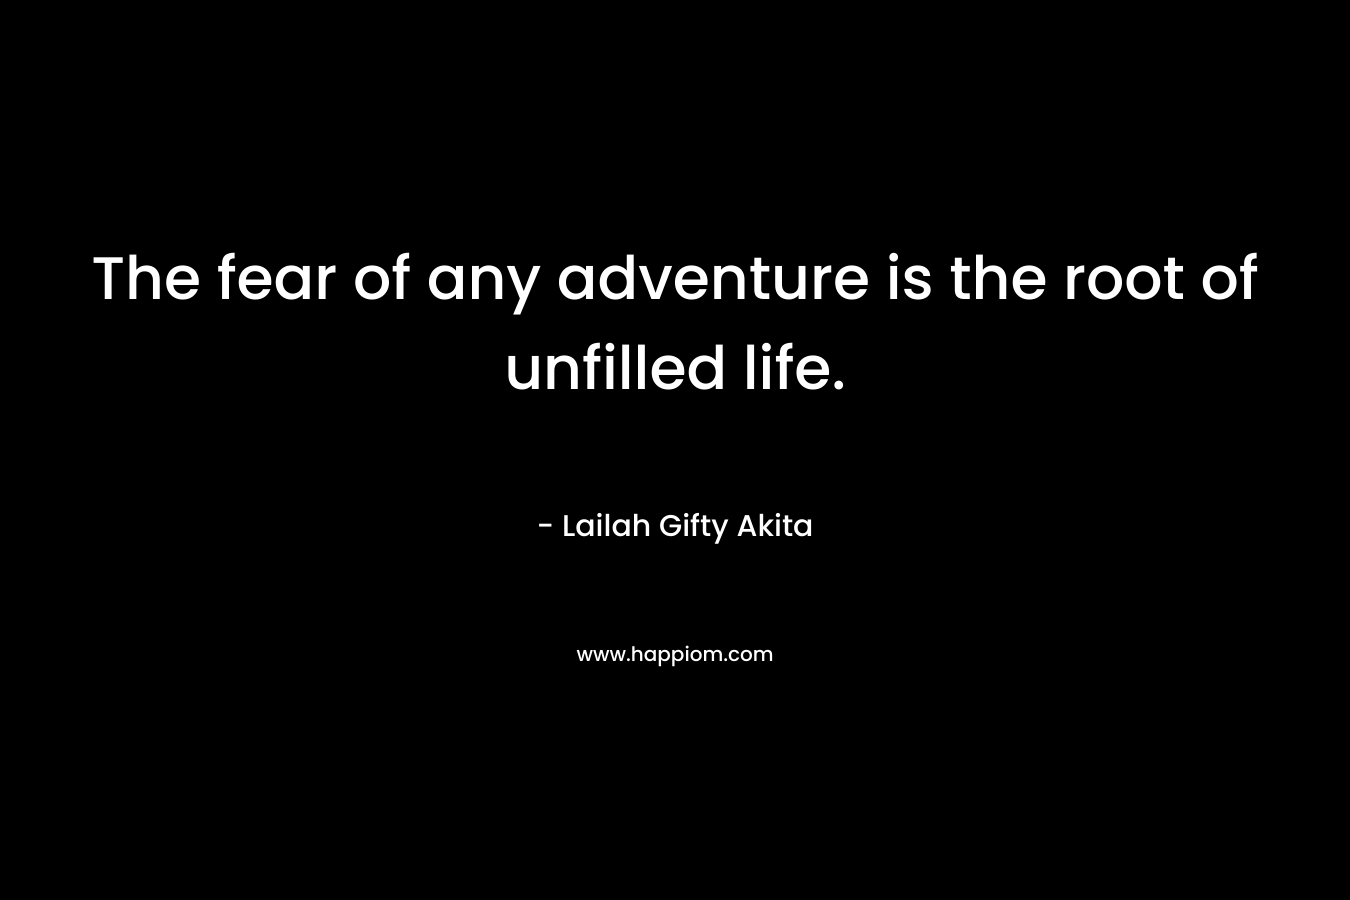 The fear of any adventure is the root of unfilled life.